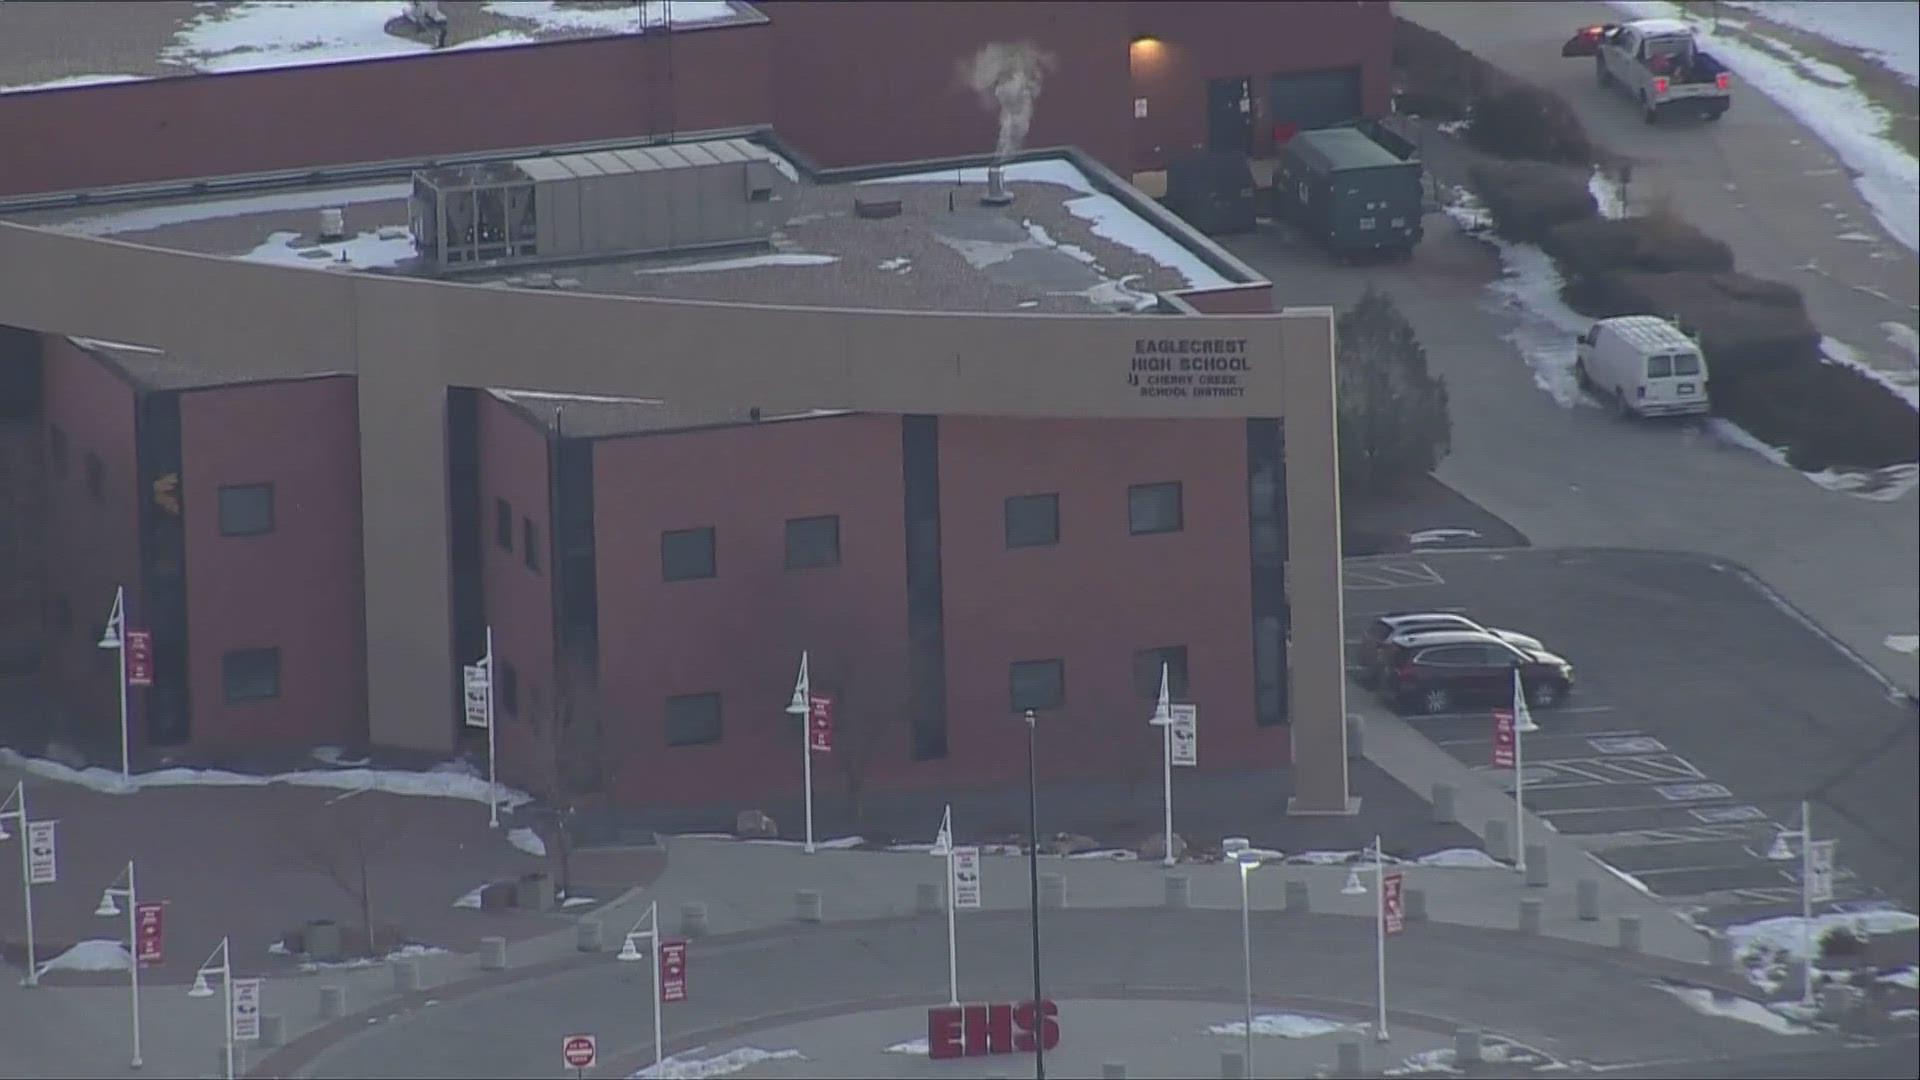 One person was taken to the hospital after multiple fights were reported at Eaglecrest High School during a basketball game with a rival school.